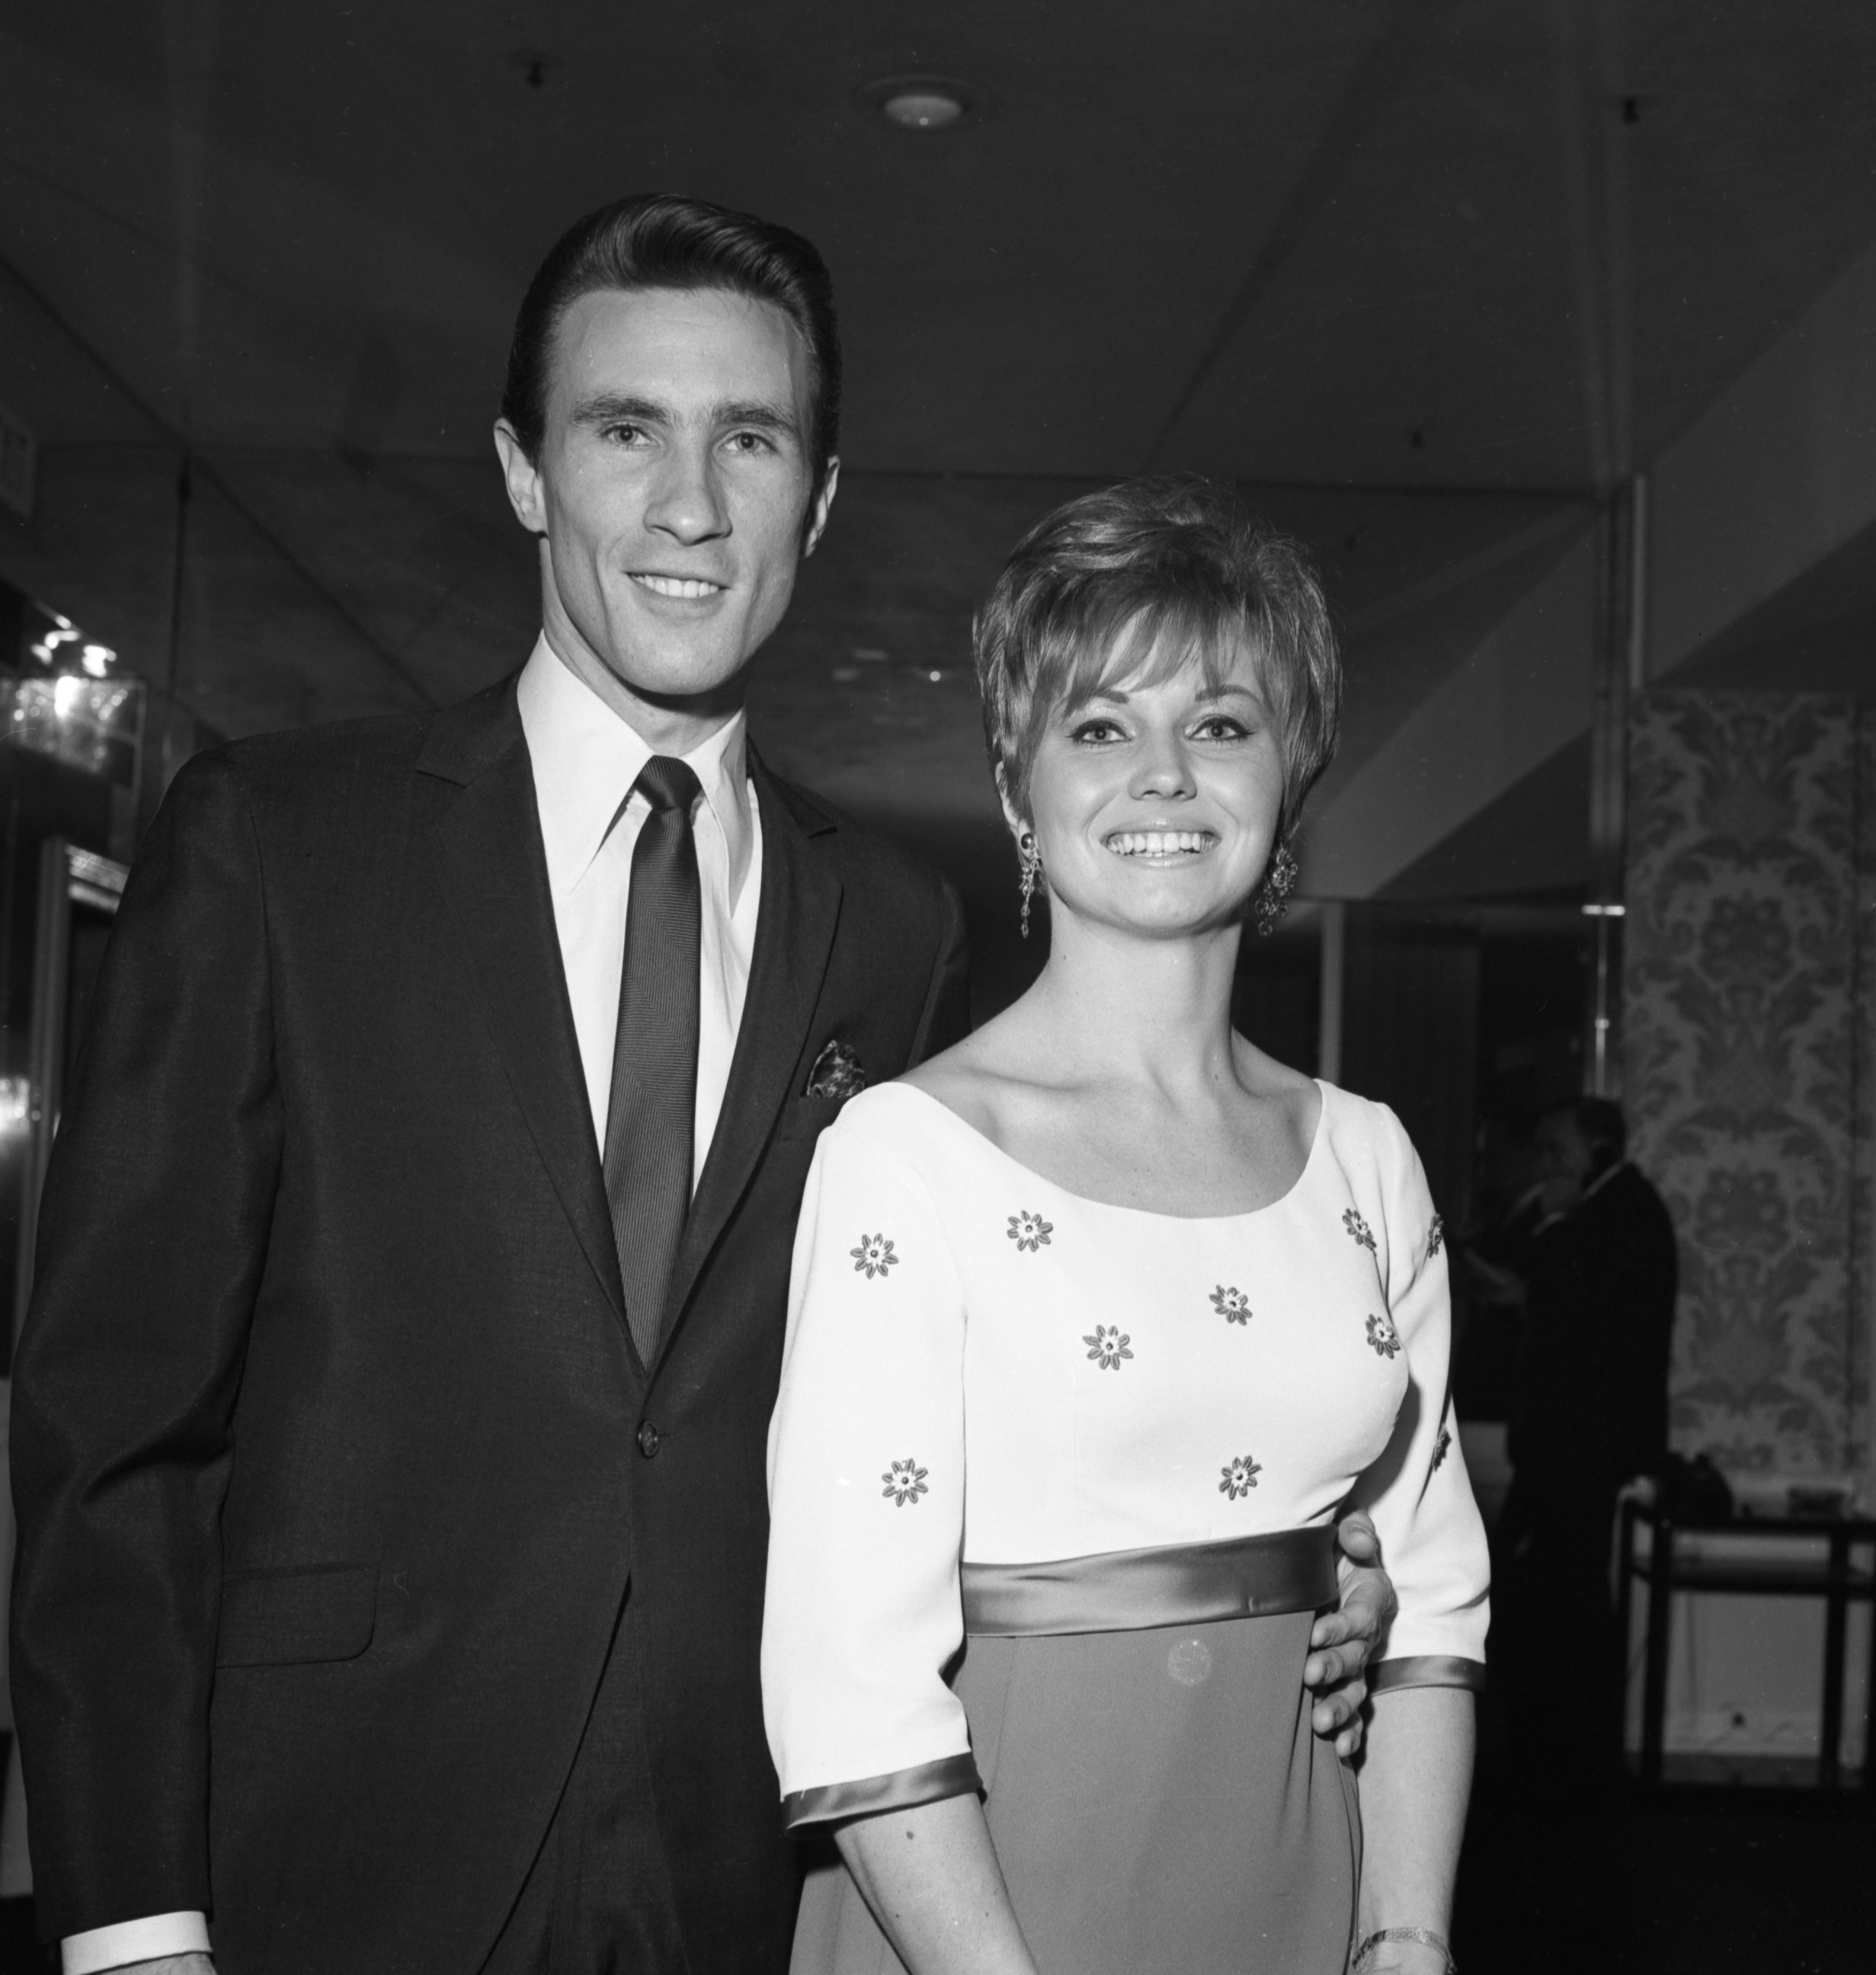 PHOTO: Bill Medley of the band "The Righteous Brothers" attends an event with his wife Karen Klaas in 1969 in Los Angeles. 